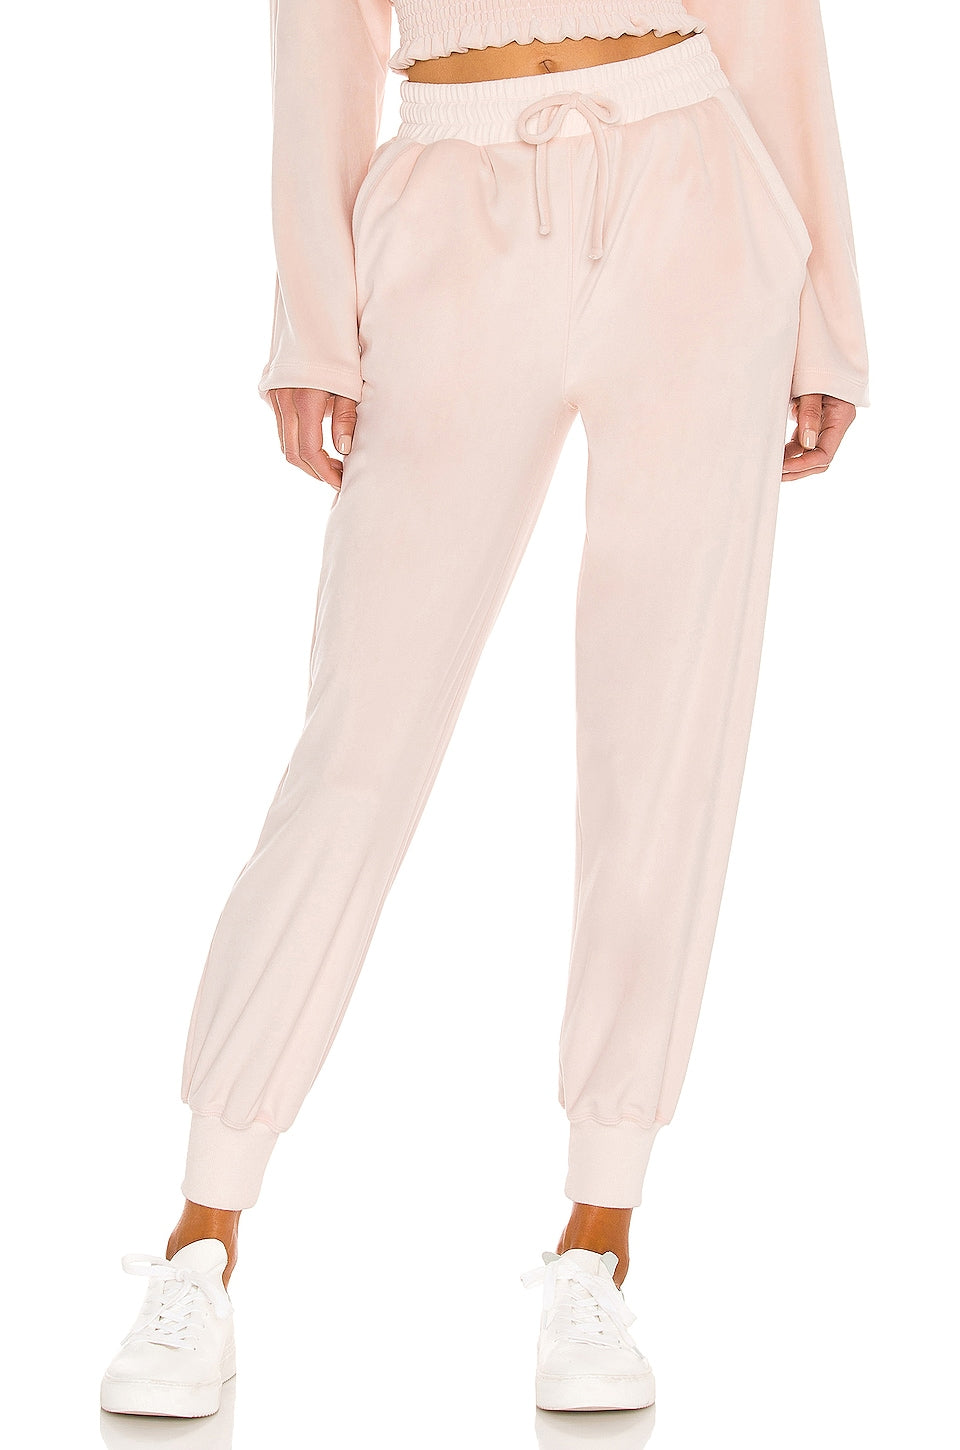 Lovers and Friends Zuma Jogger in Peony Pink Size XXS